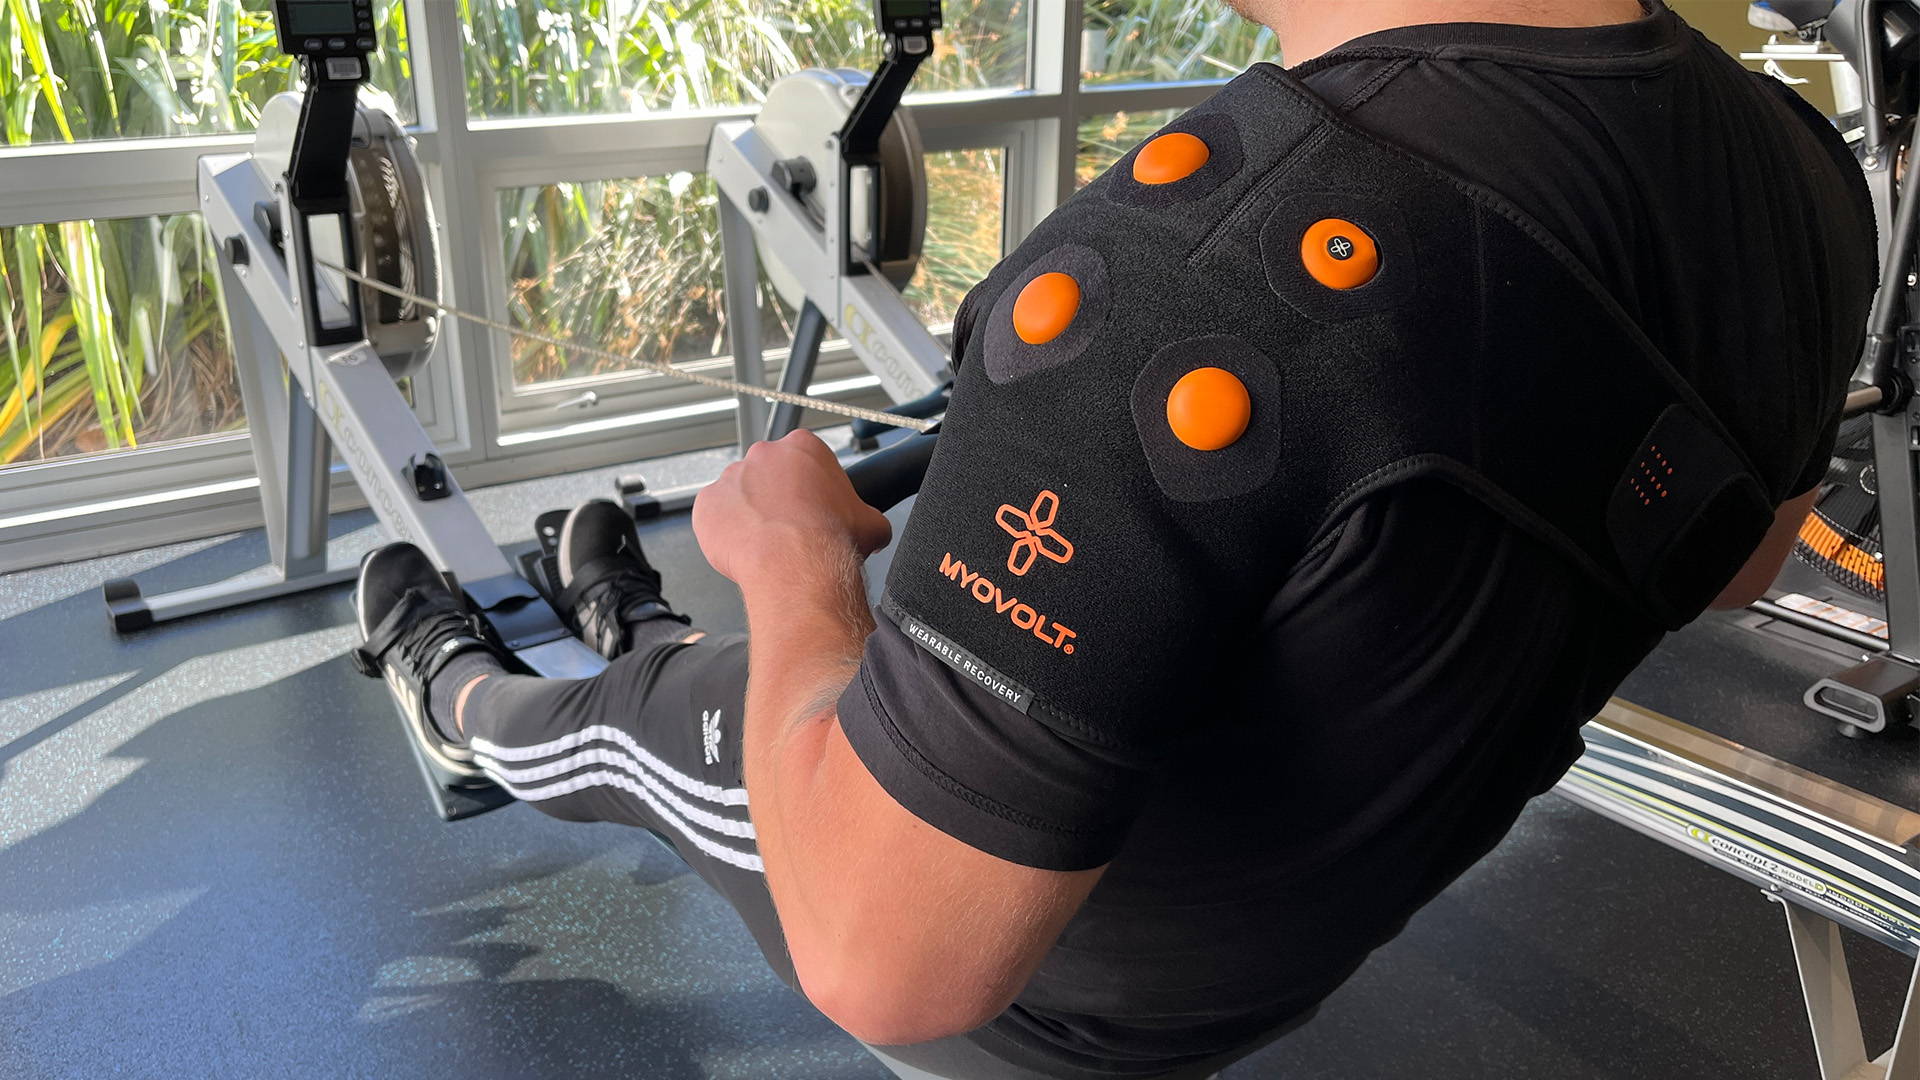 Ease muscle tension, pain and stiffness in the shoulder joint with Myovolt vibration therapy shoulder brace suitable for shoulder pain caused by rowing.